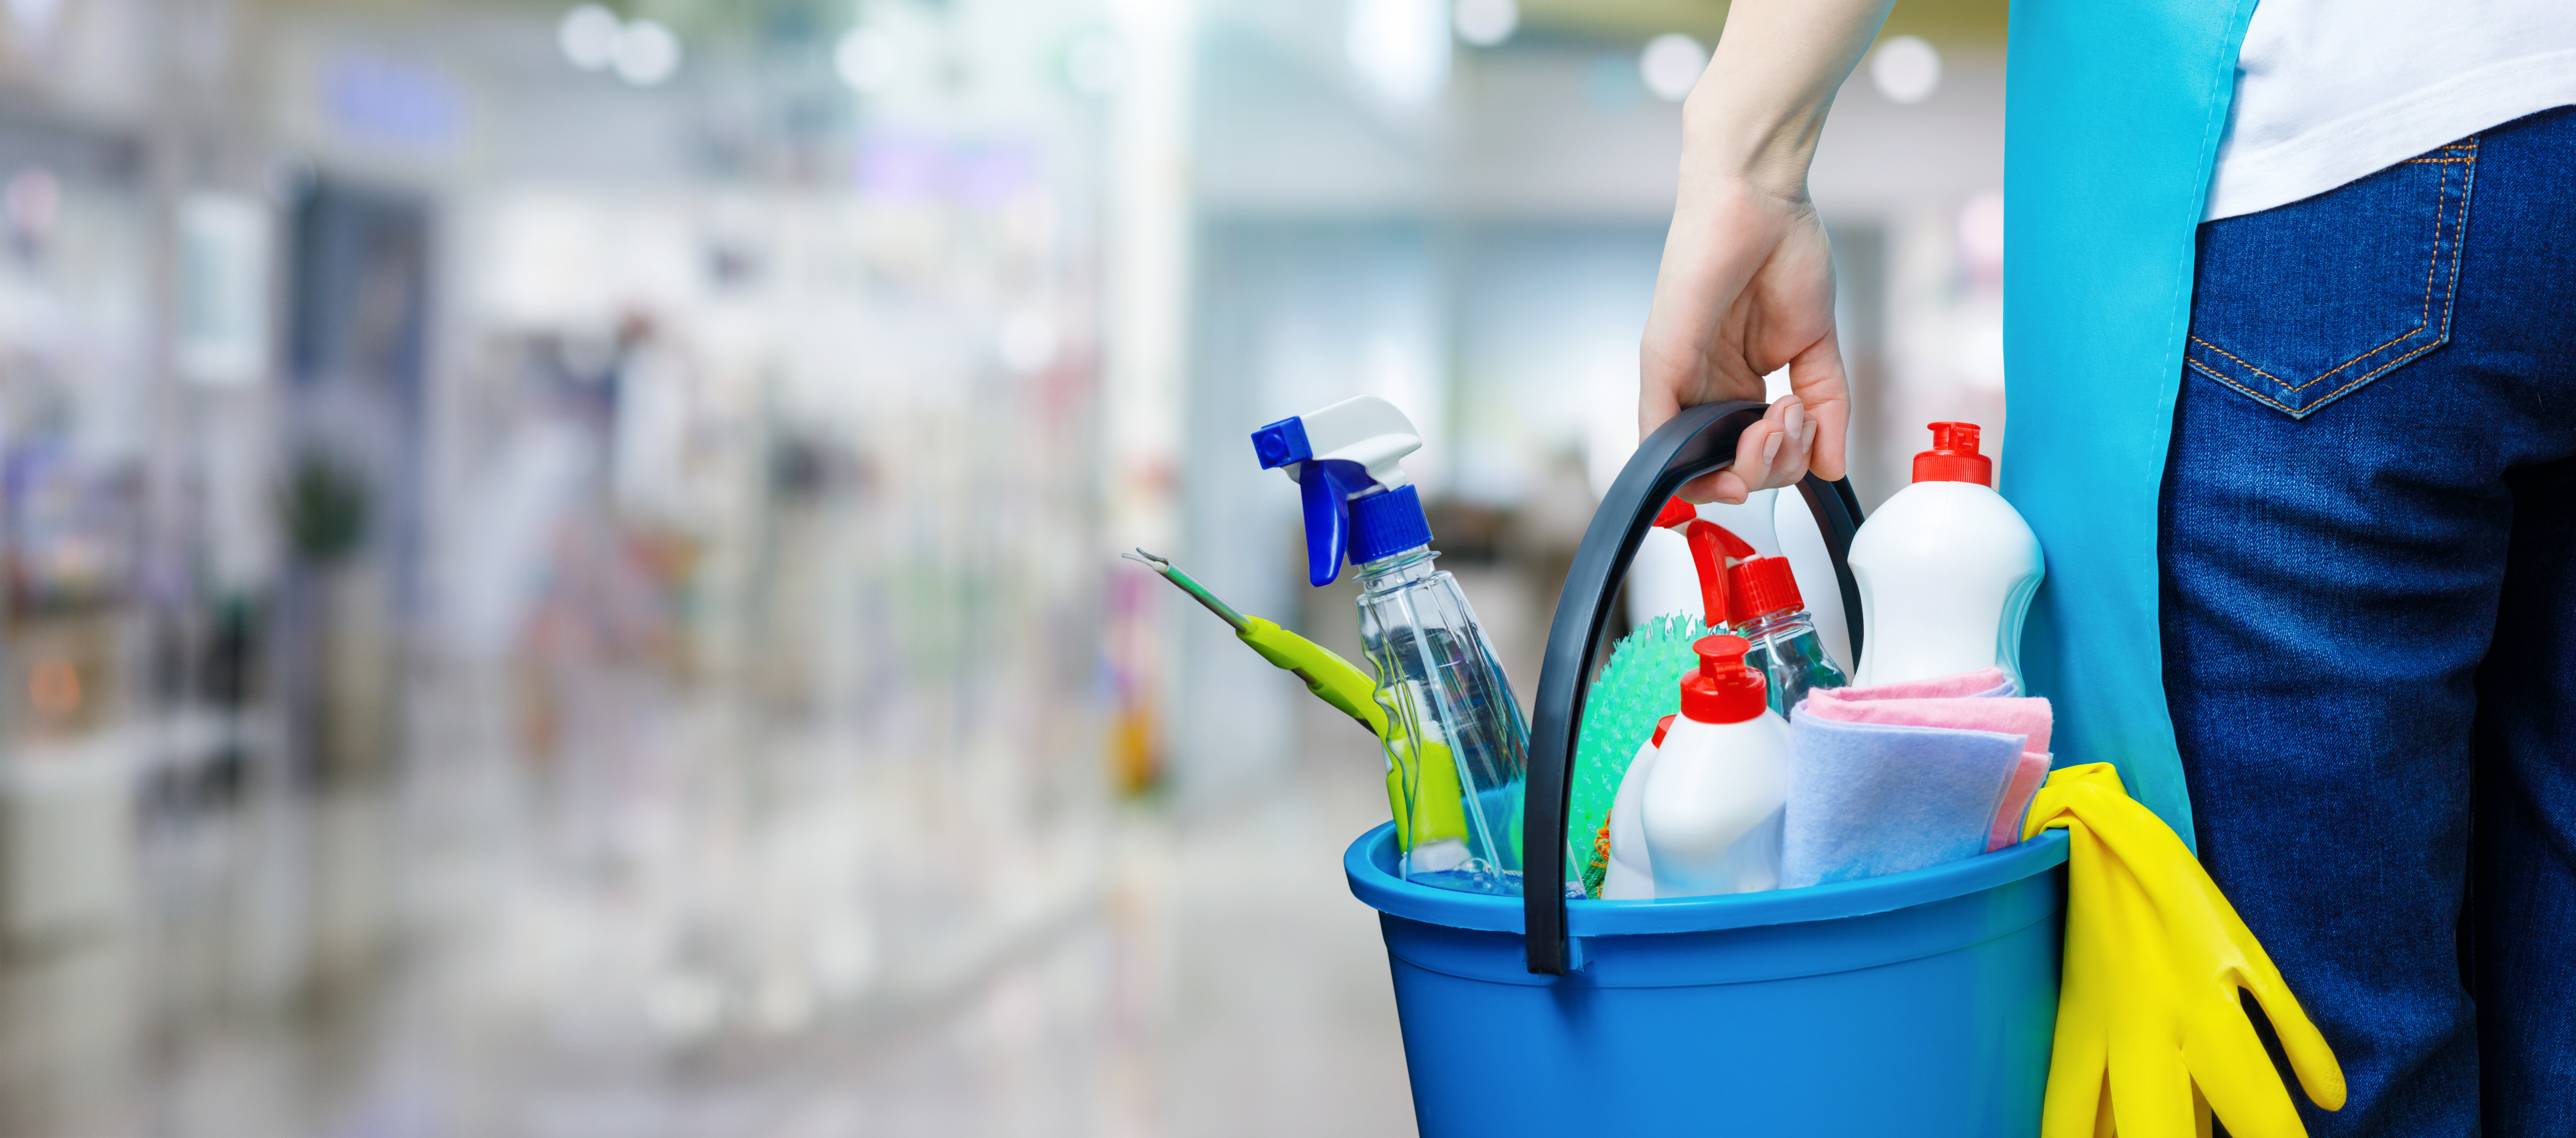 6 Ways To Attract More Clients For Your Cleaning Service